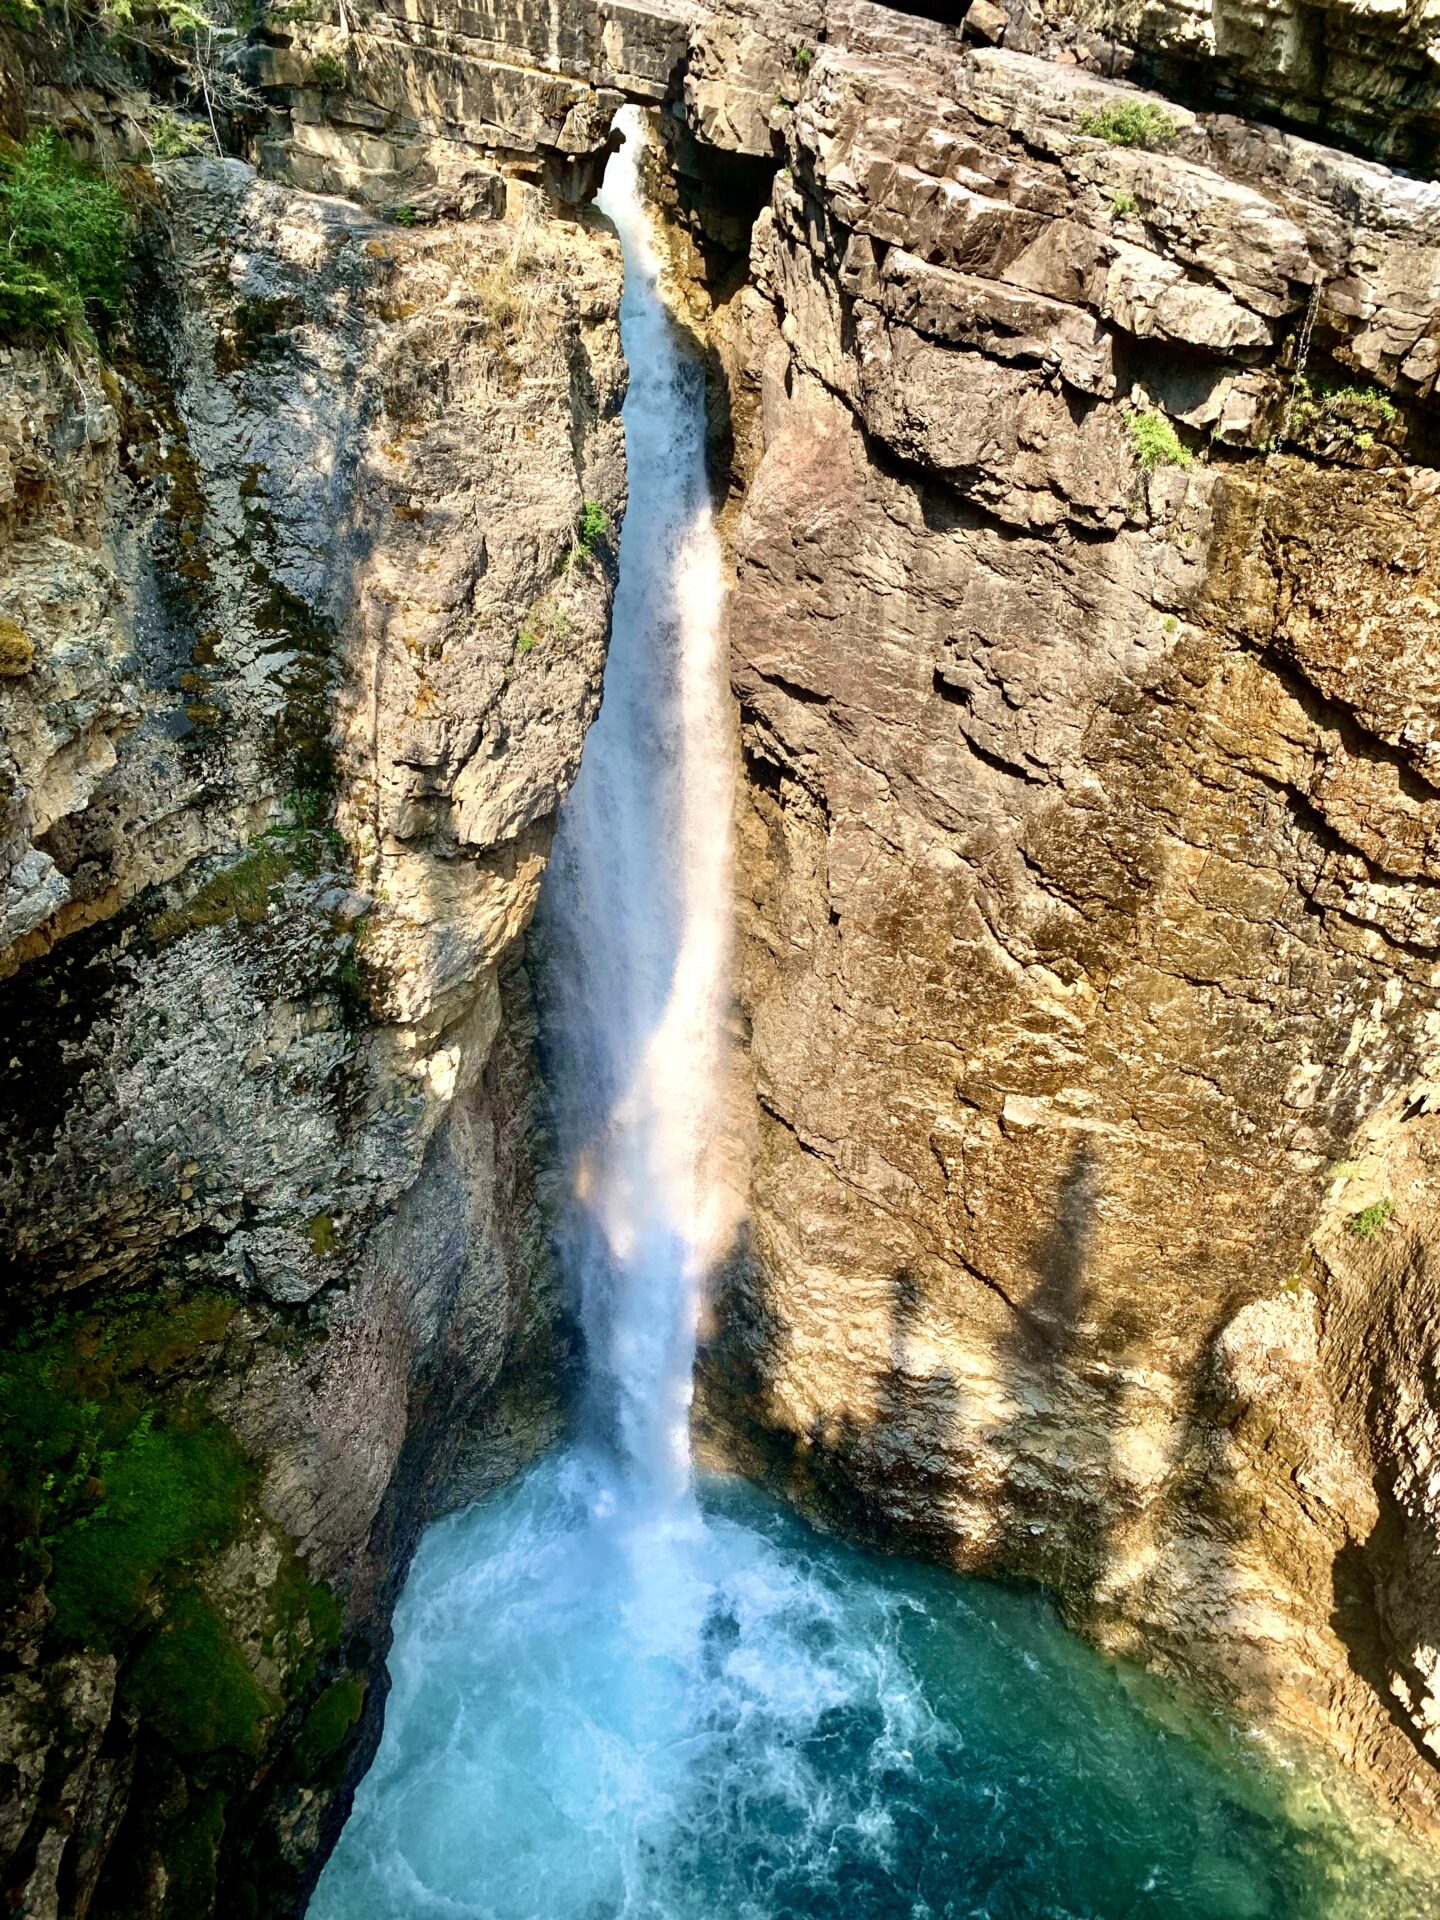 Johnston Canyon Ink Pots hike in Banff